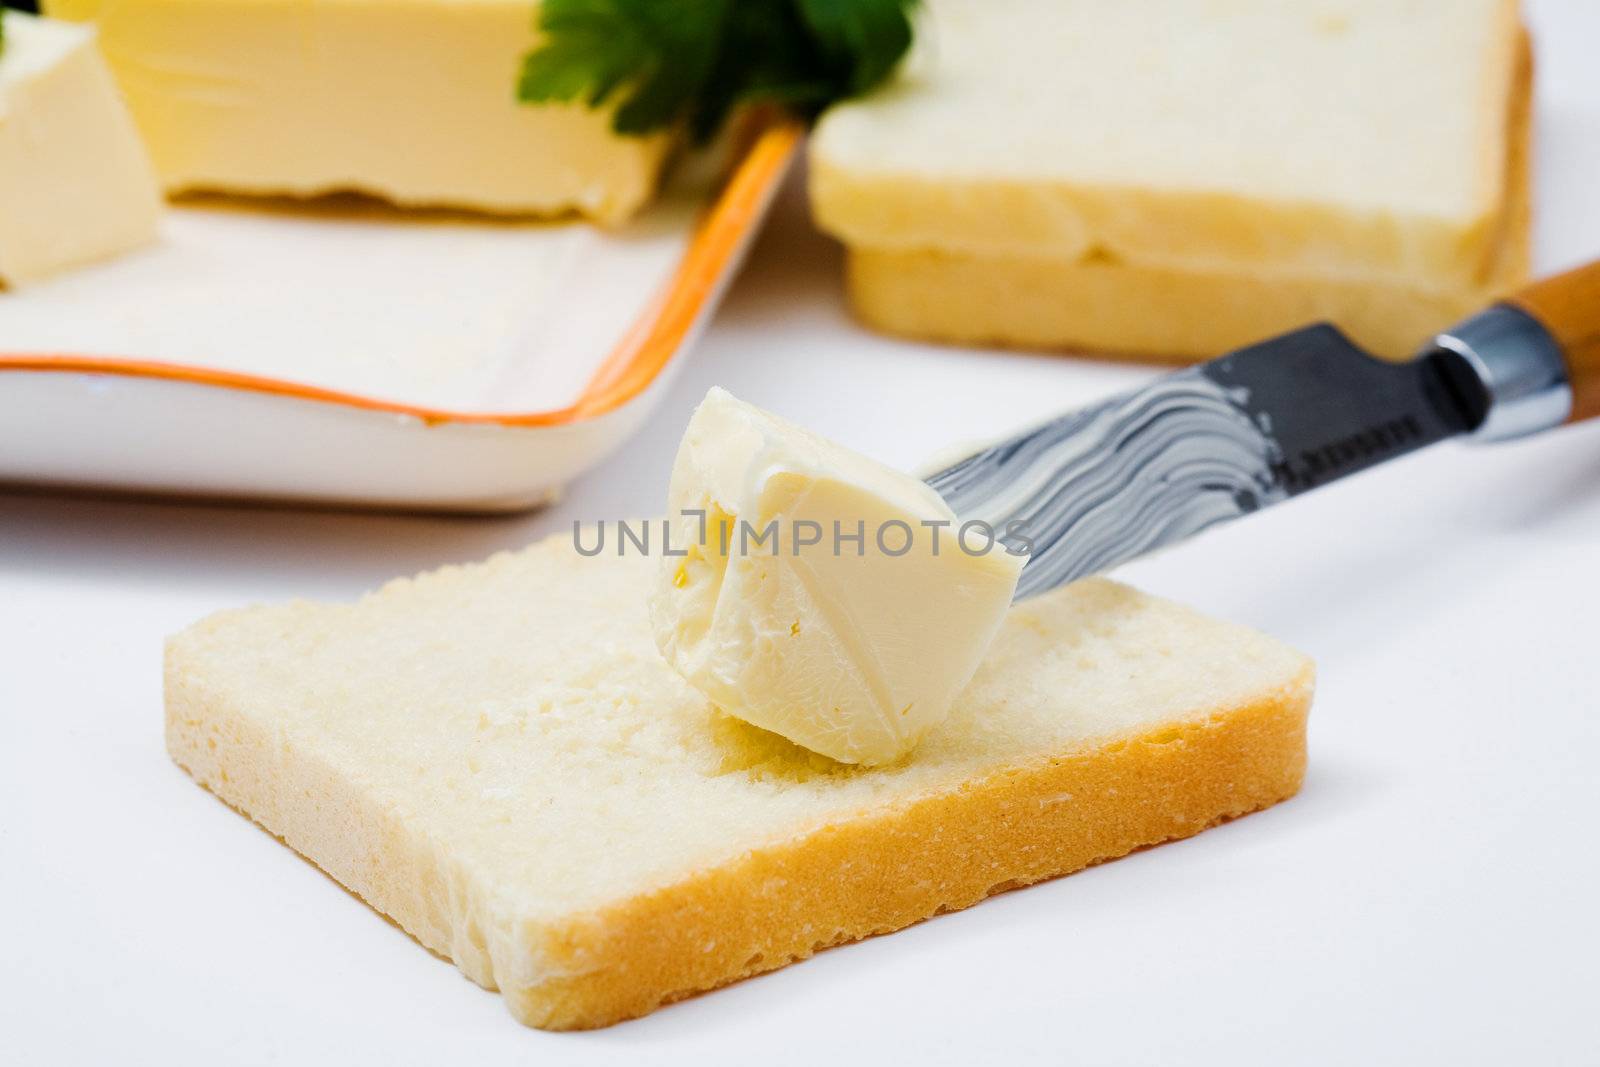 Stock photo: an image of yellow butter on bread and a knife